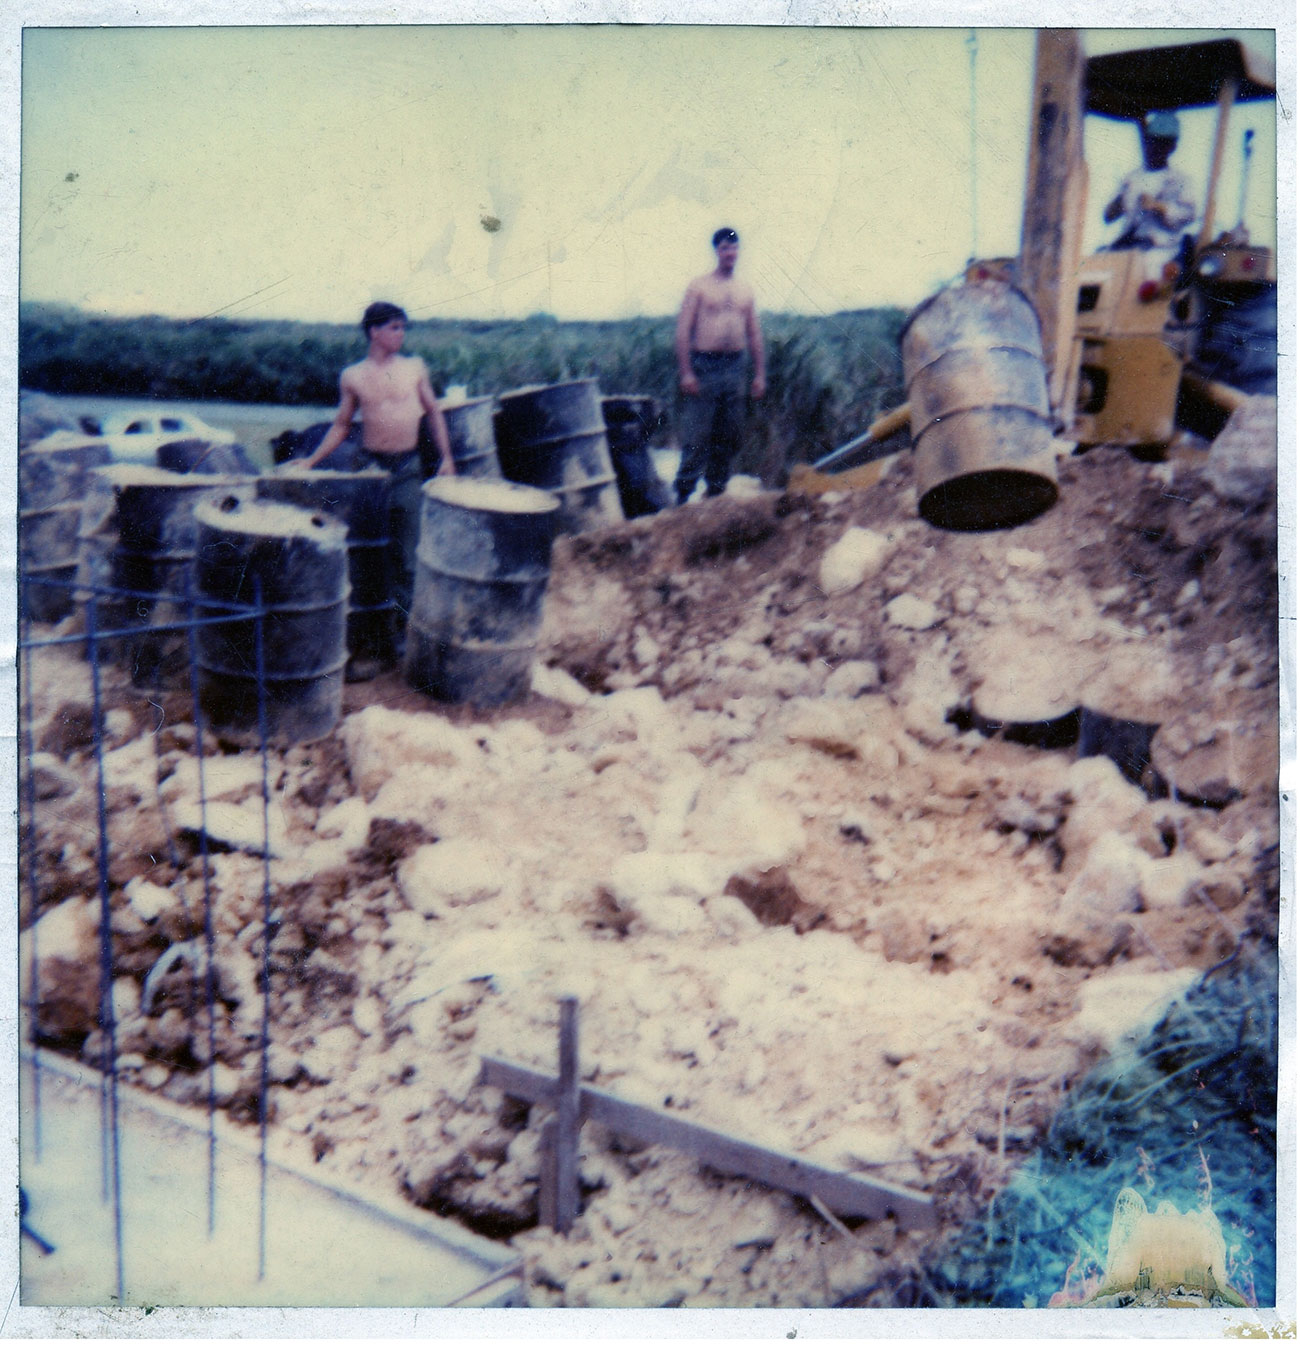 Evidence ignored in Pentagon probe: A picture supplied by Kris Roberts, the former maintenance chief at Futenma air station, shows the worksite where he says he unearthed some 100 barrels of Agent Orange in 1981. Roberts is now a state representative in New Hampshire. | JON MITCHELL